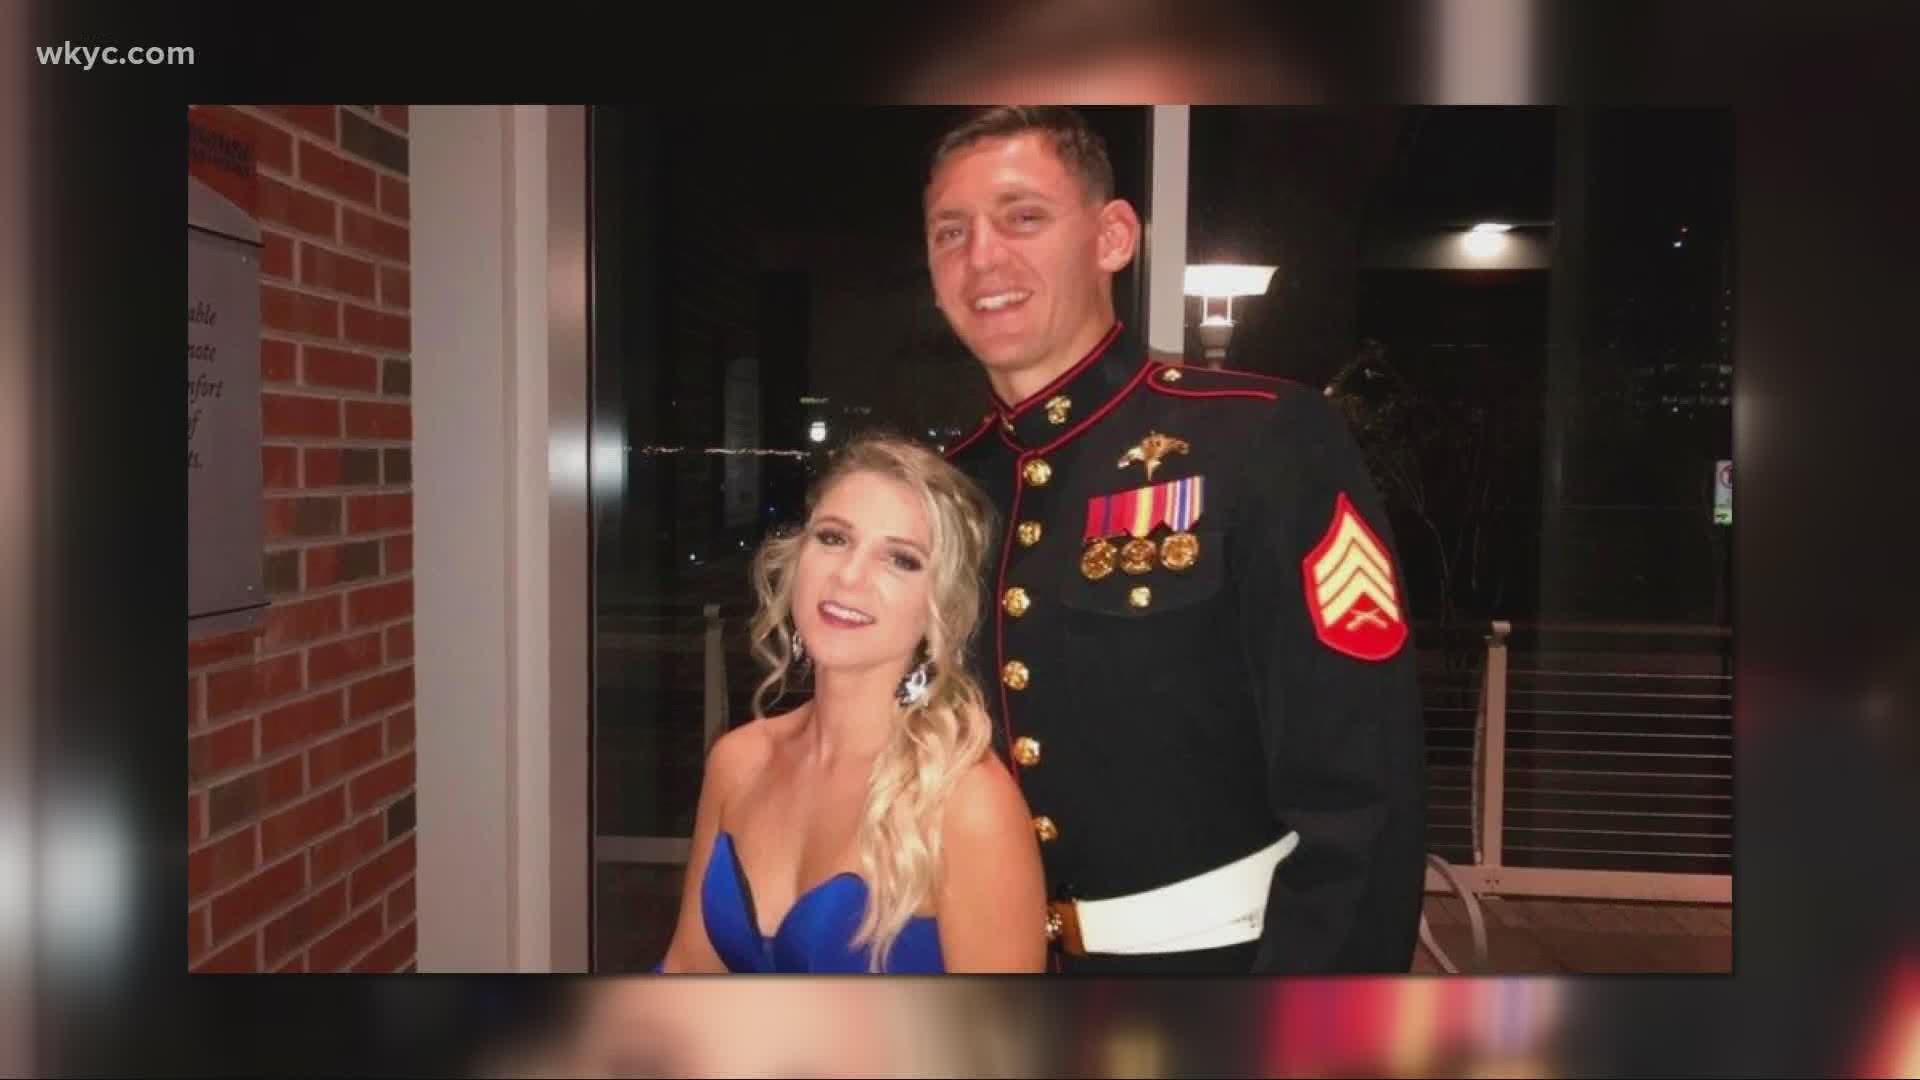 Governor DeWine is asking flags to flown at half-staff in honor of a local marine.  Sgt. Kyle Weniger was killed in a training accident last week in Georgia.